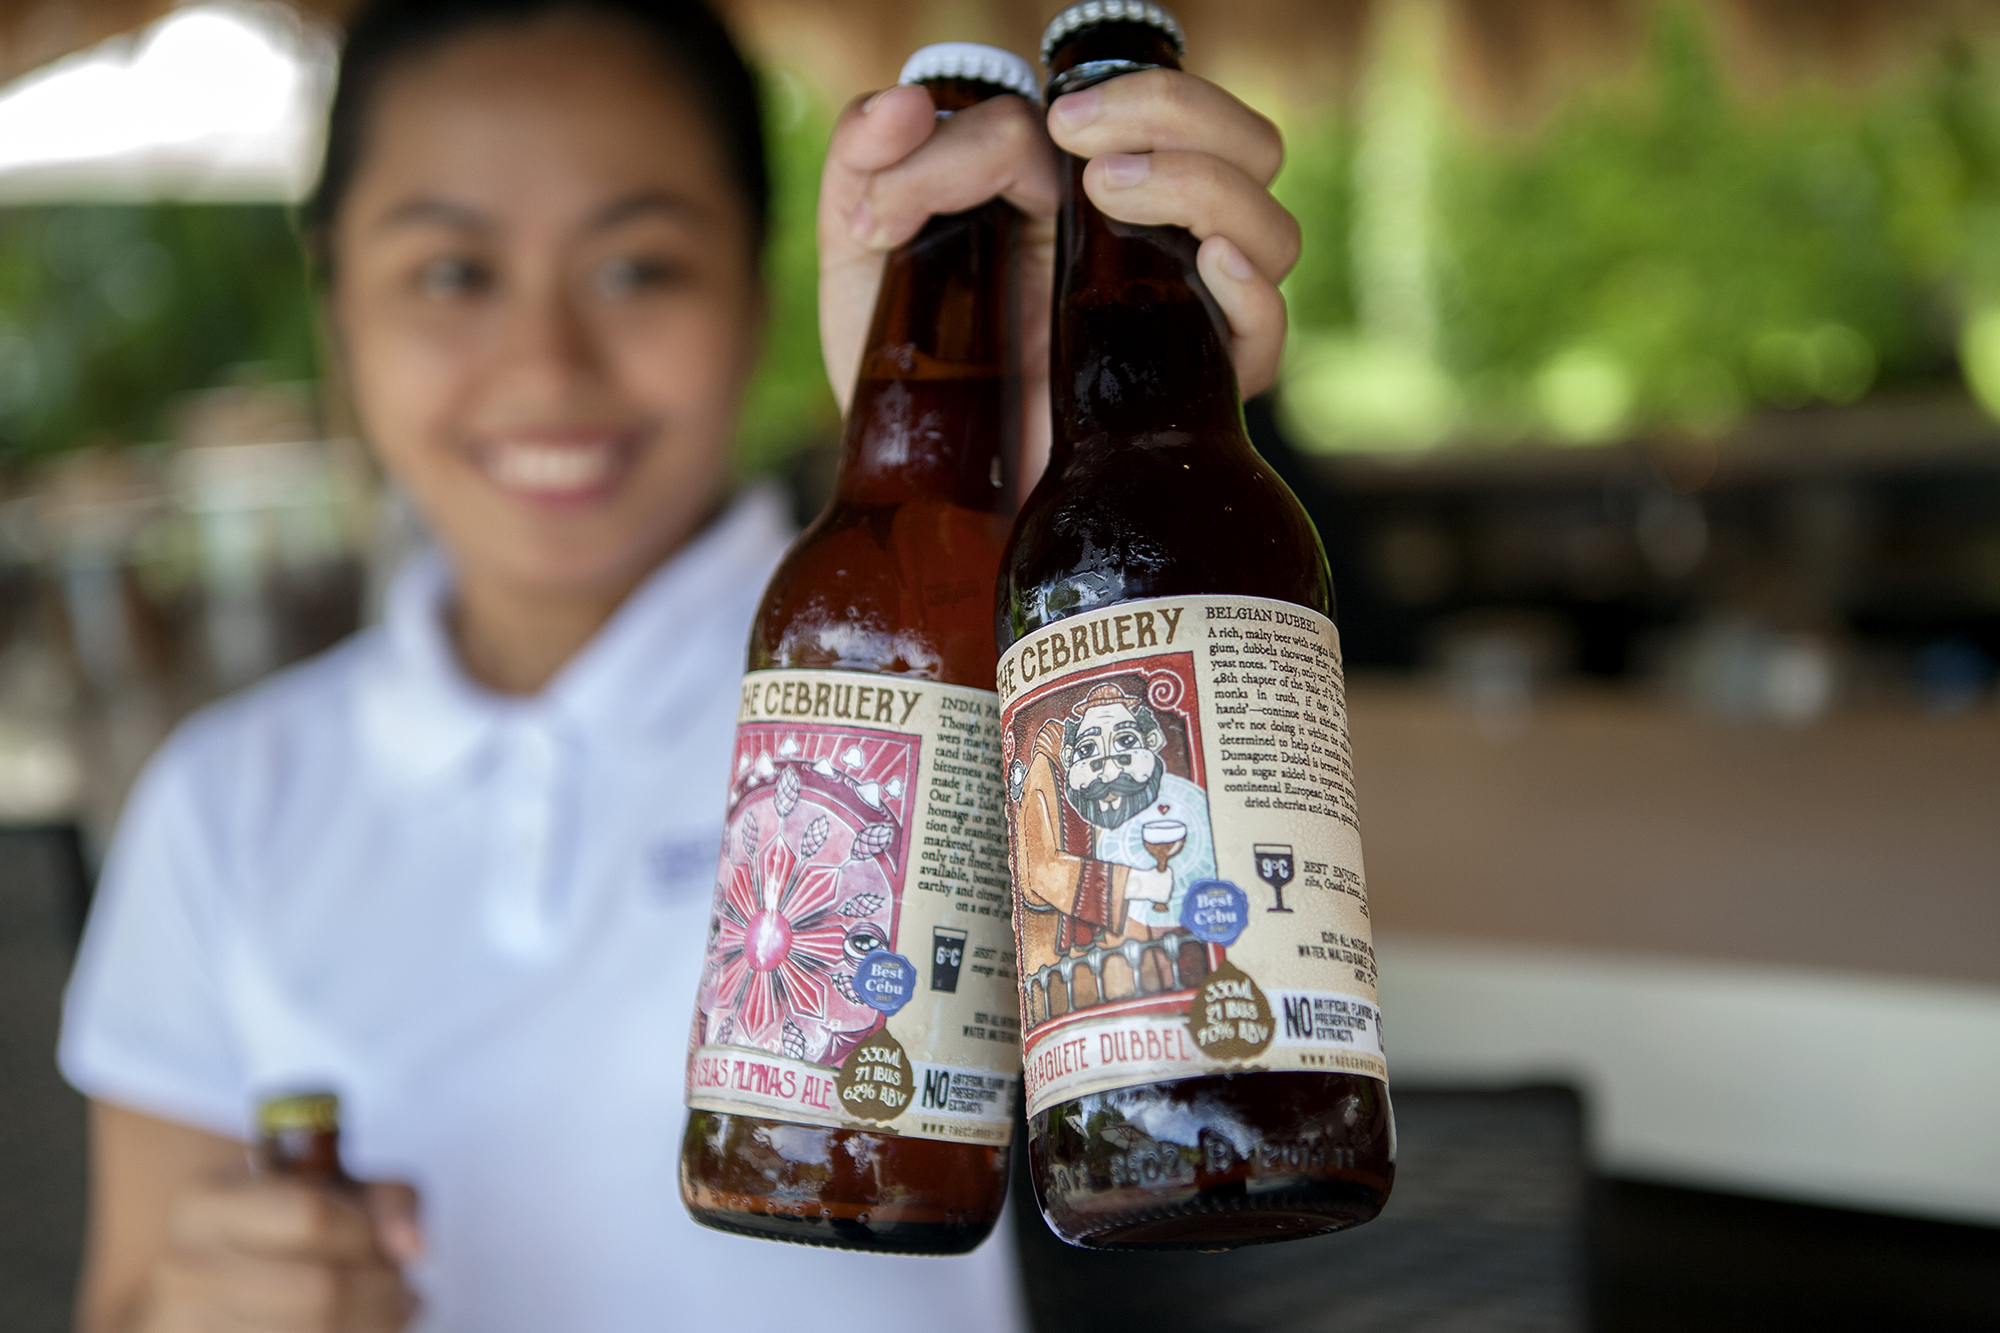 Beers from microbrewery the Cebruery in cebu, served at Atmosphere Resort Philippines